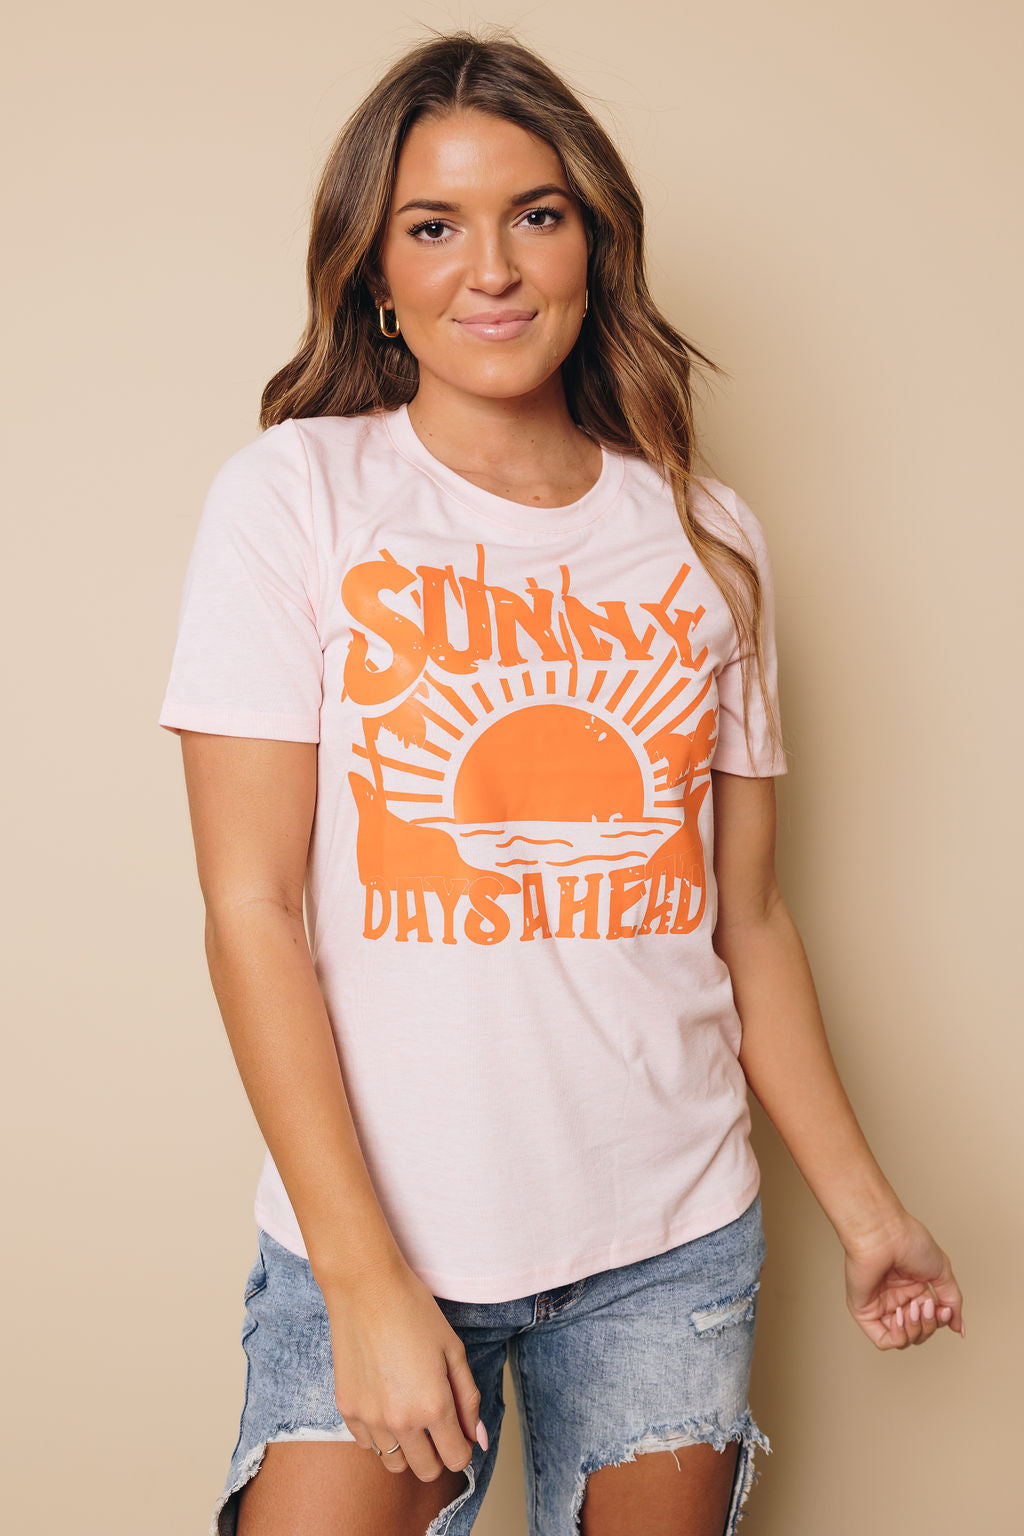 Sunny Days Ahead T-Shirt Stay Warm In Style